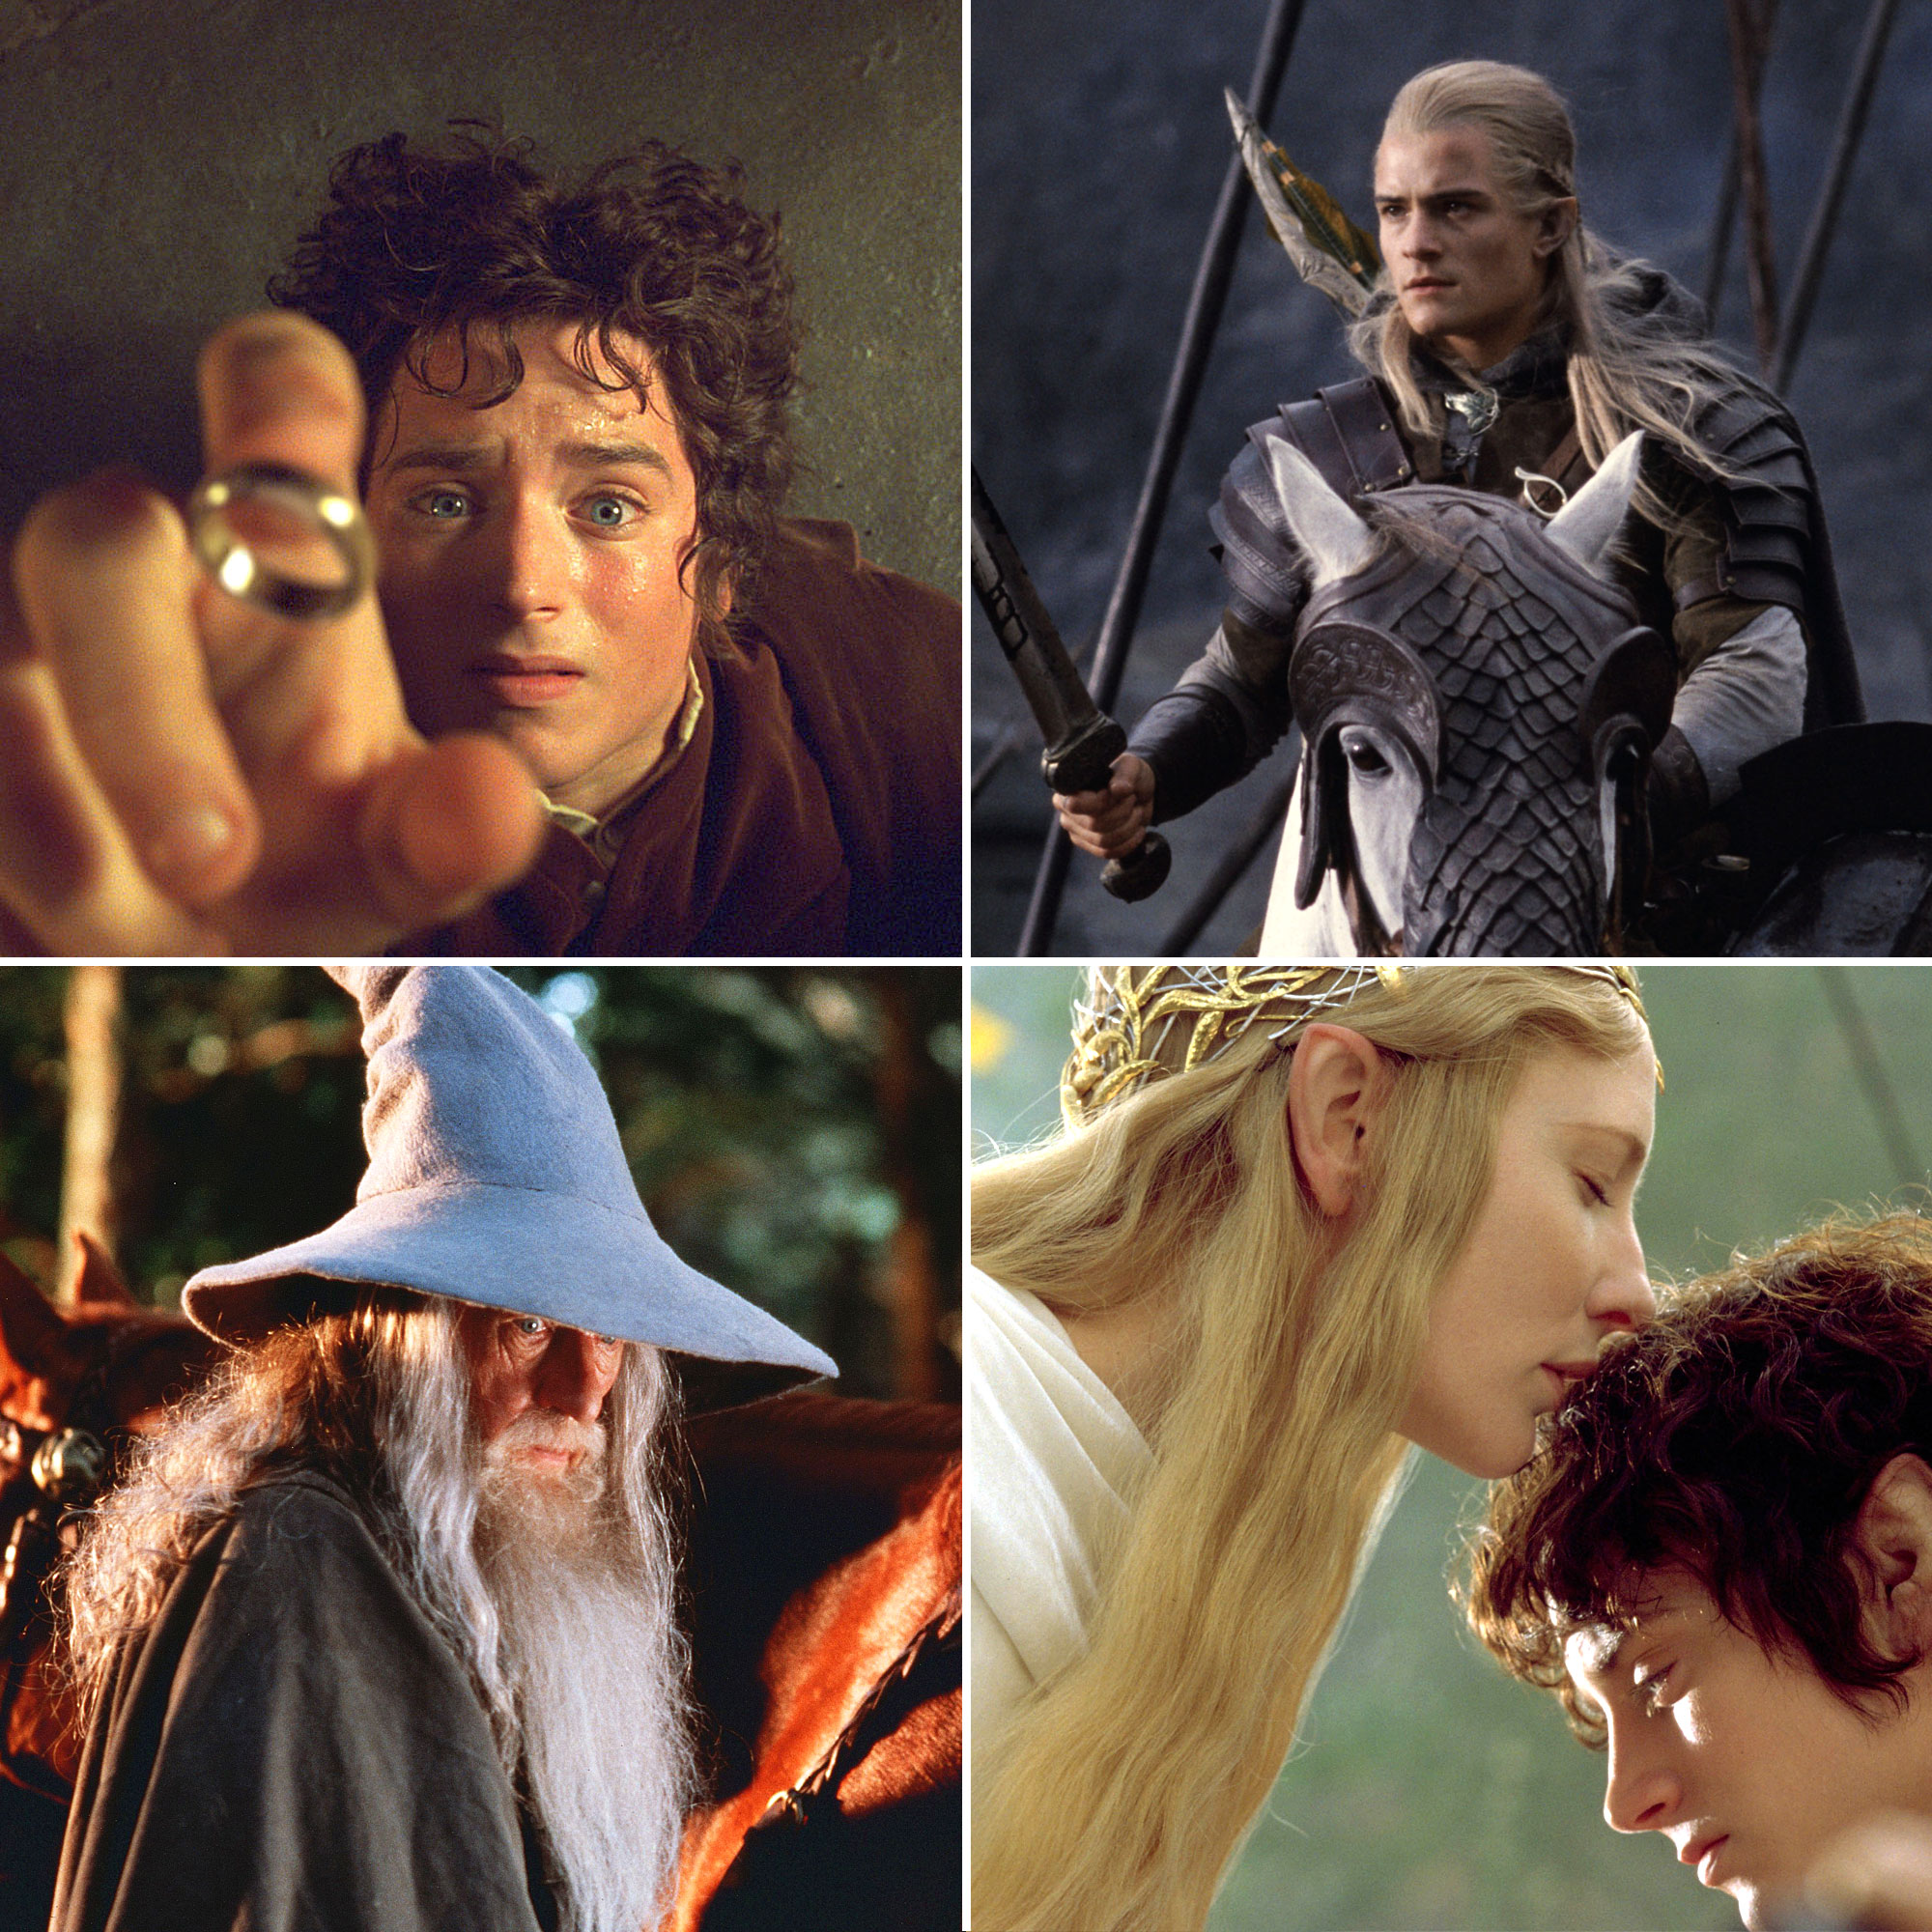 New LORD OF THE RINGS Movies in the Works (Yes, Really)